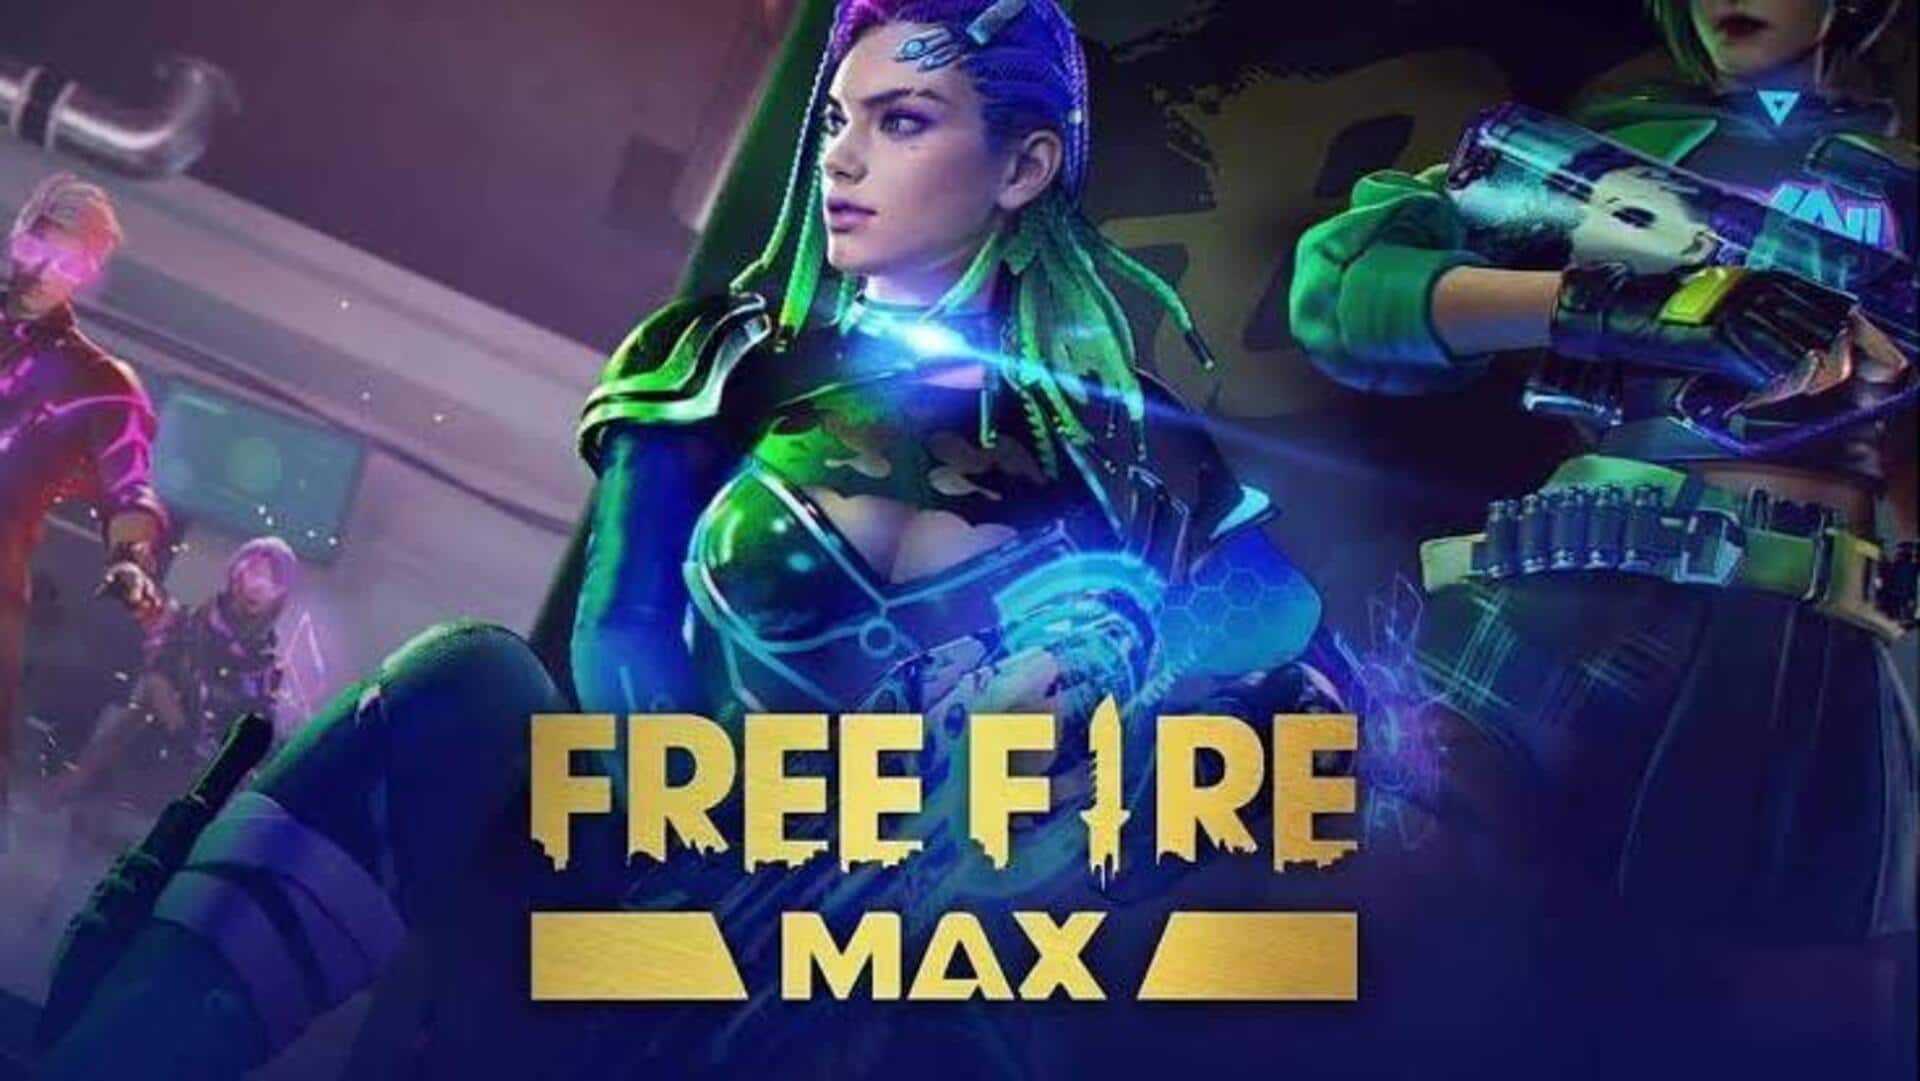 Garena Free Fire MAX's August 1 codes: How to redeem